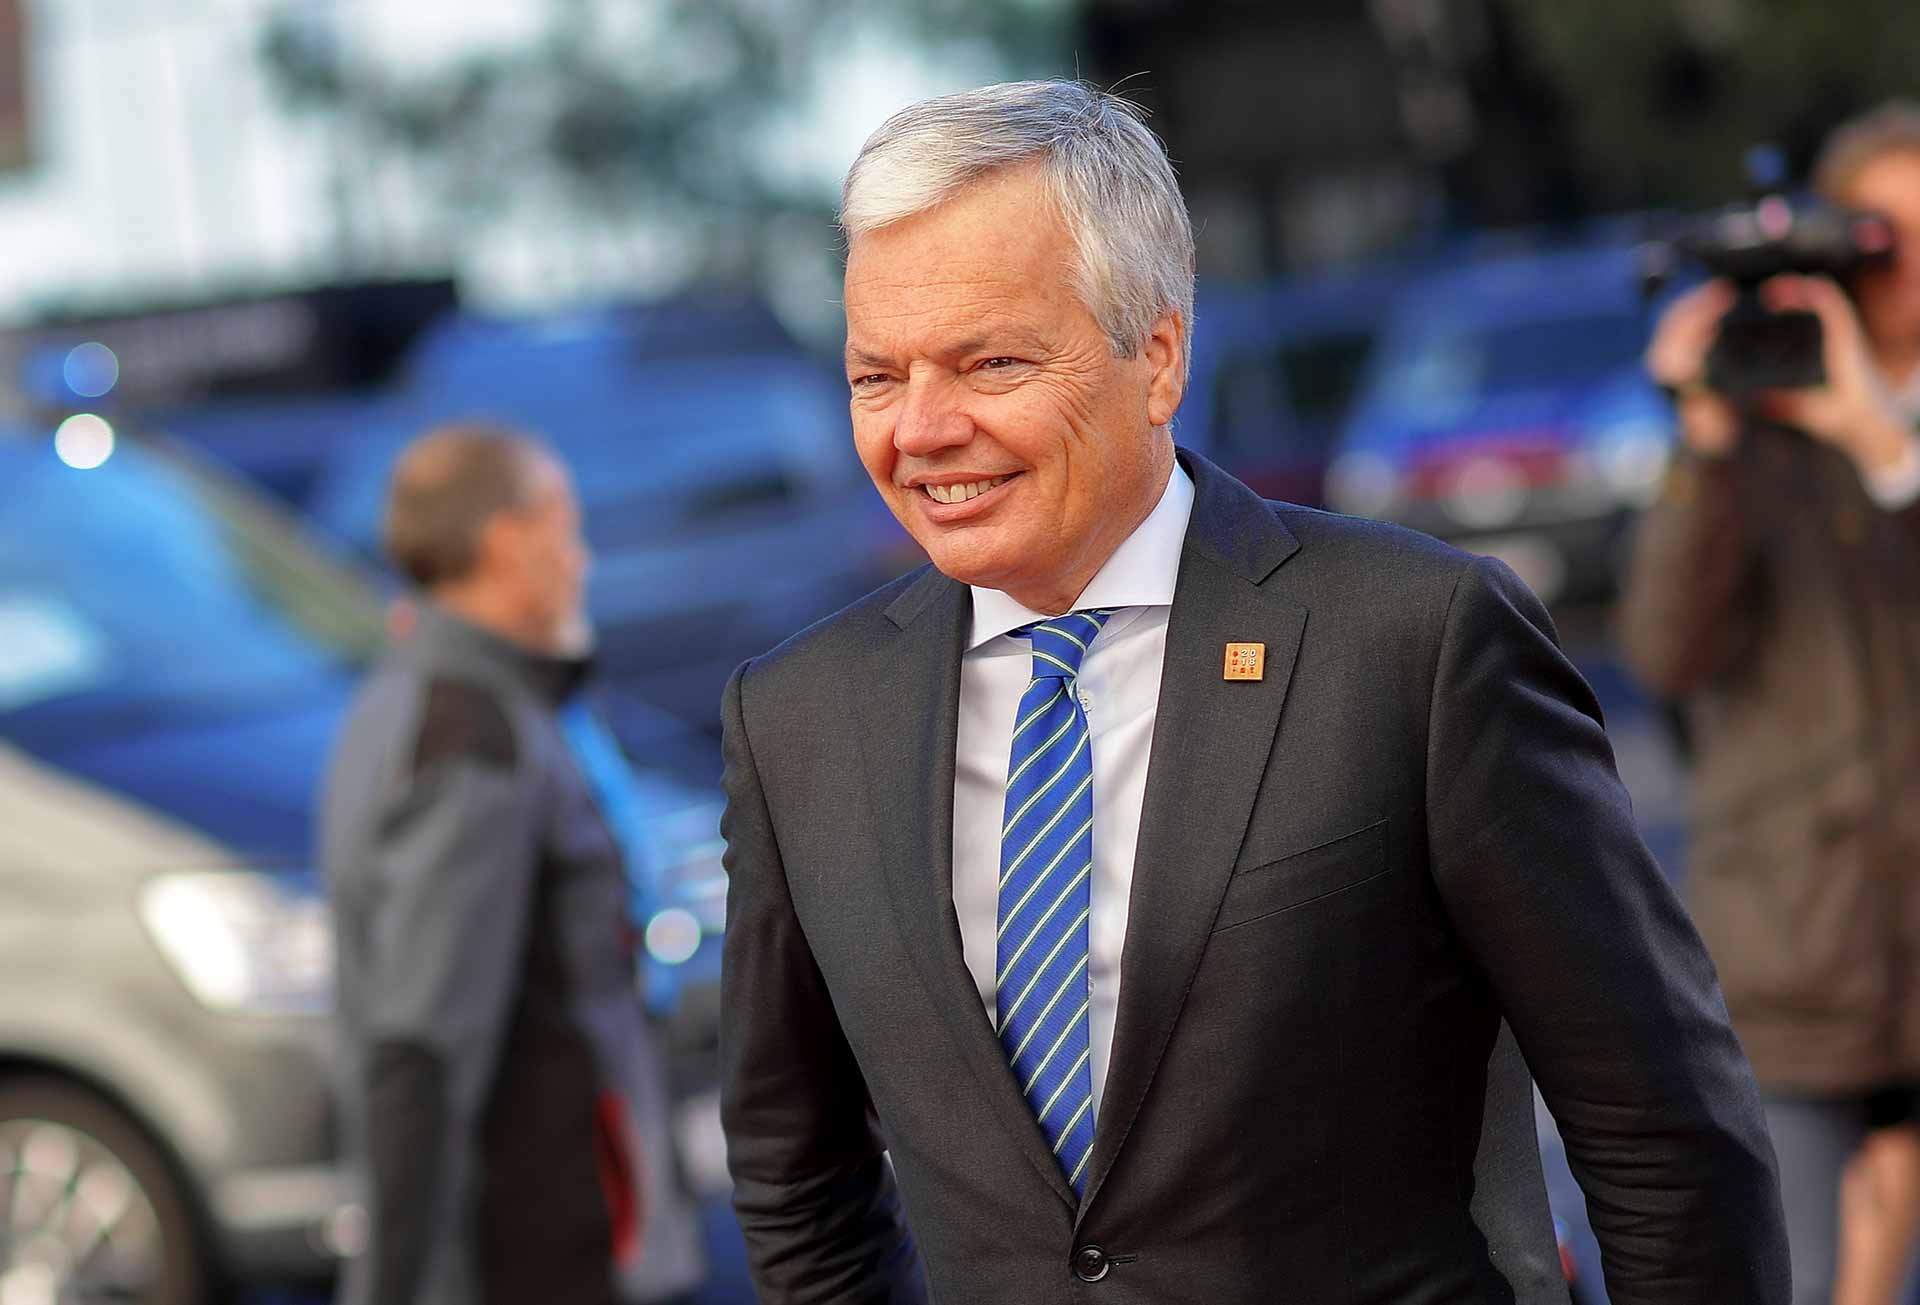 Didier Reynders Commissioner for Justice